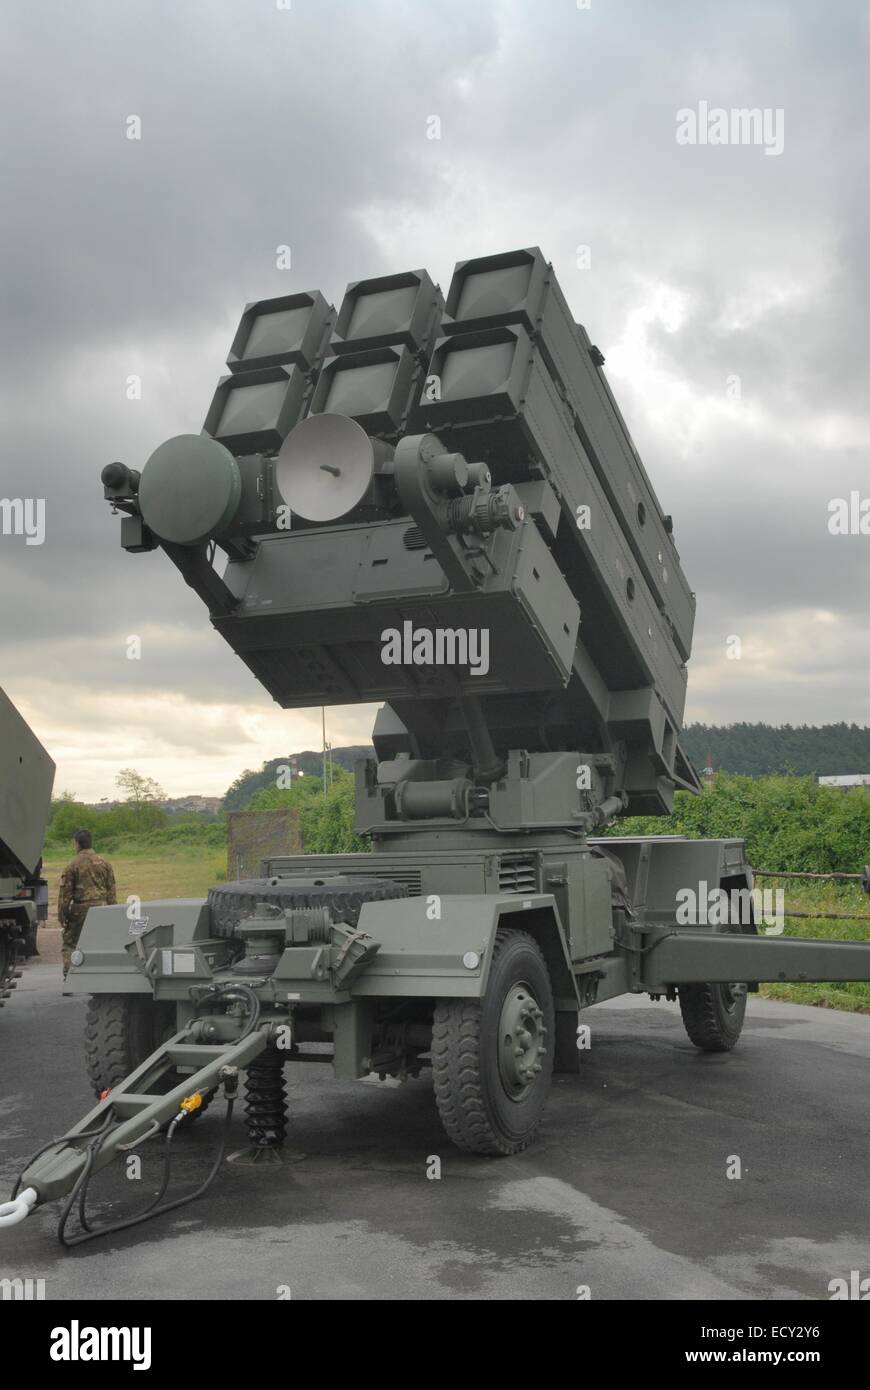 Italian Air Force, anti aircraft missile launcher Spada for Aspide missiles Stock Photo